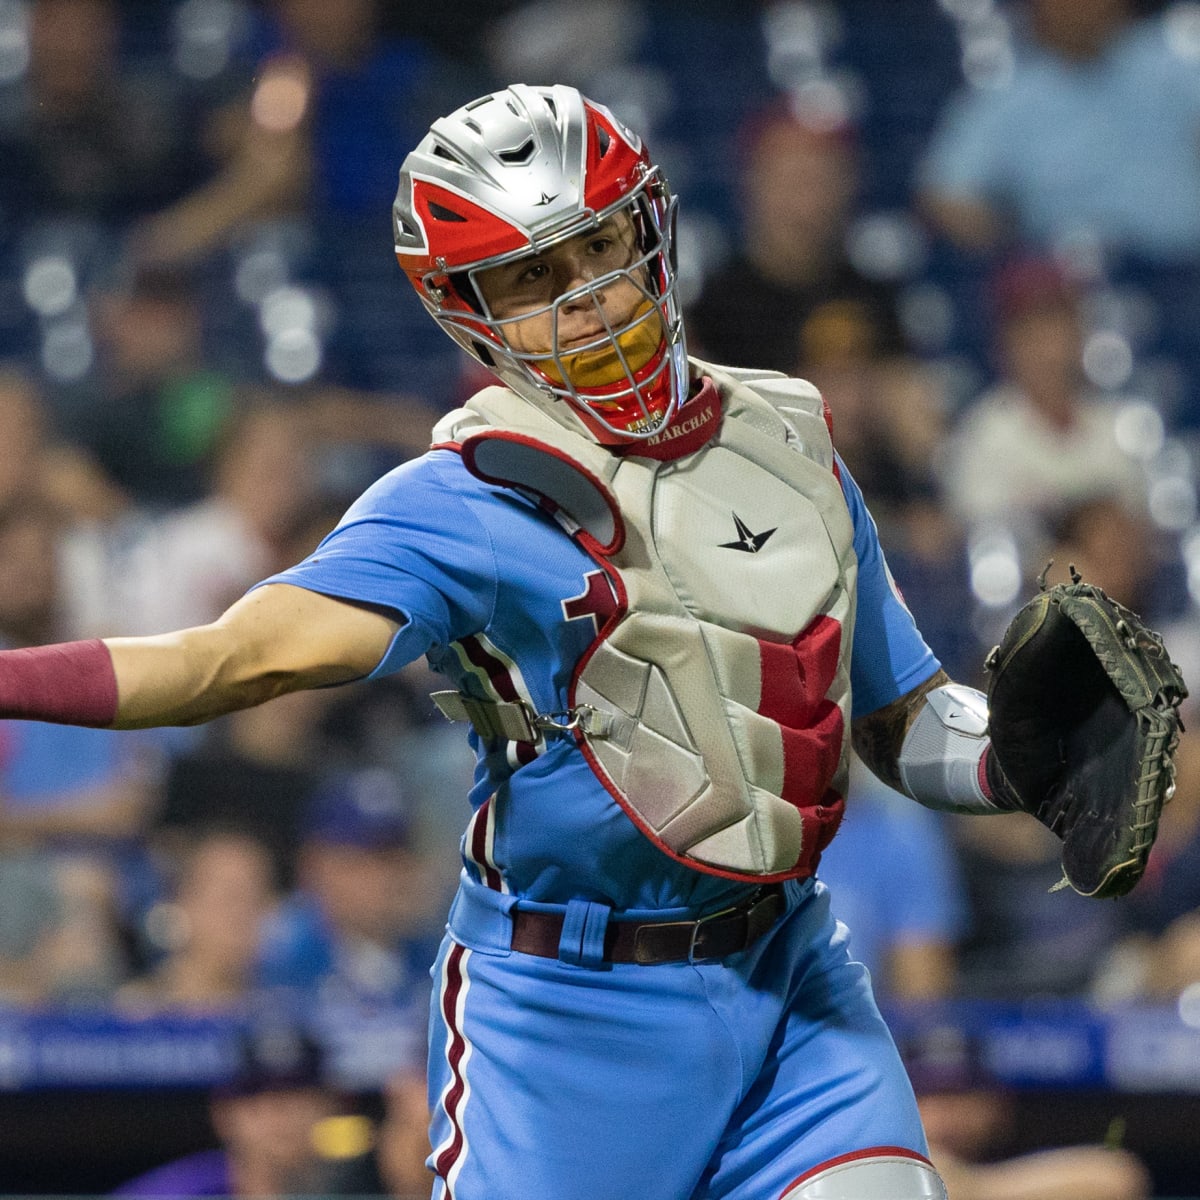 Why did Phillies trade two clubhouse favorites?